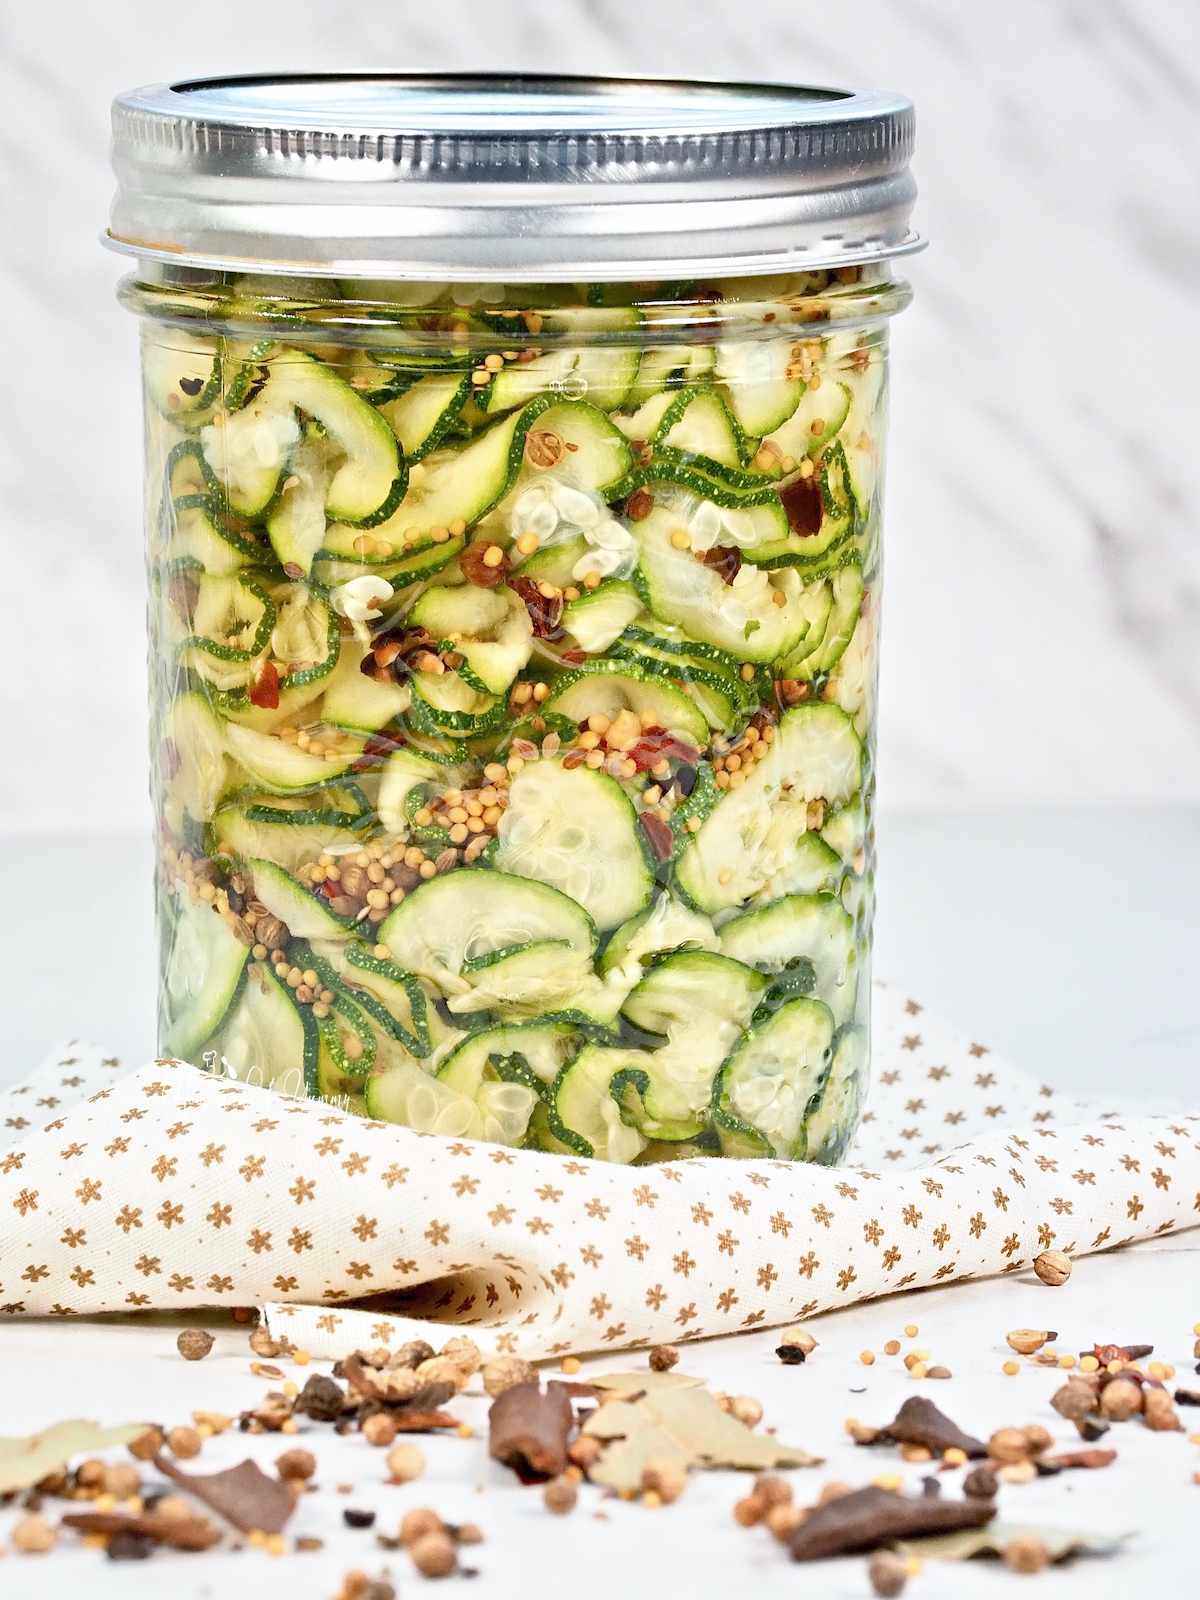 A jar of pickled zucchini ribbons ready to eat.